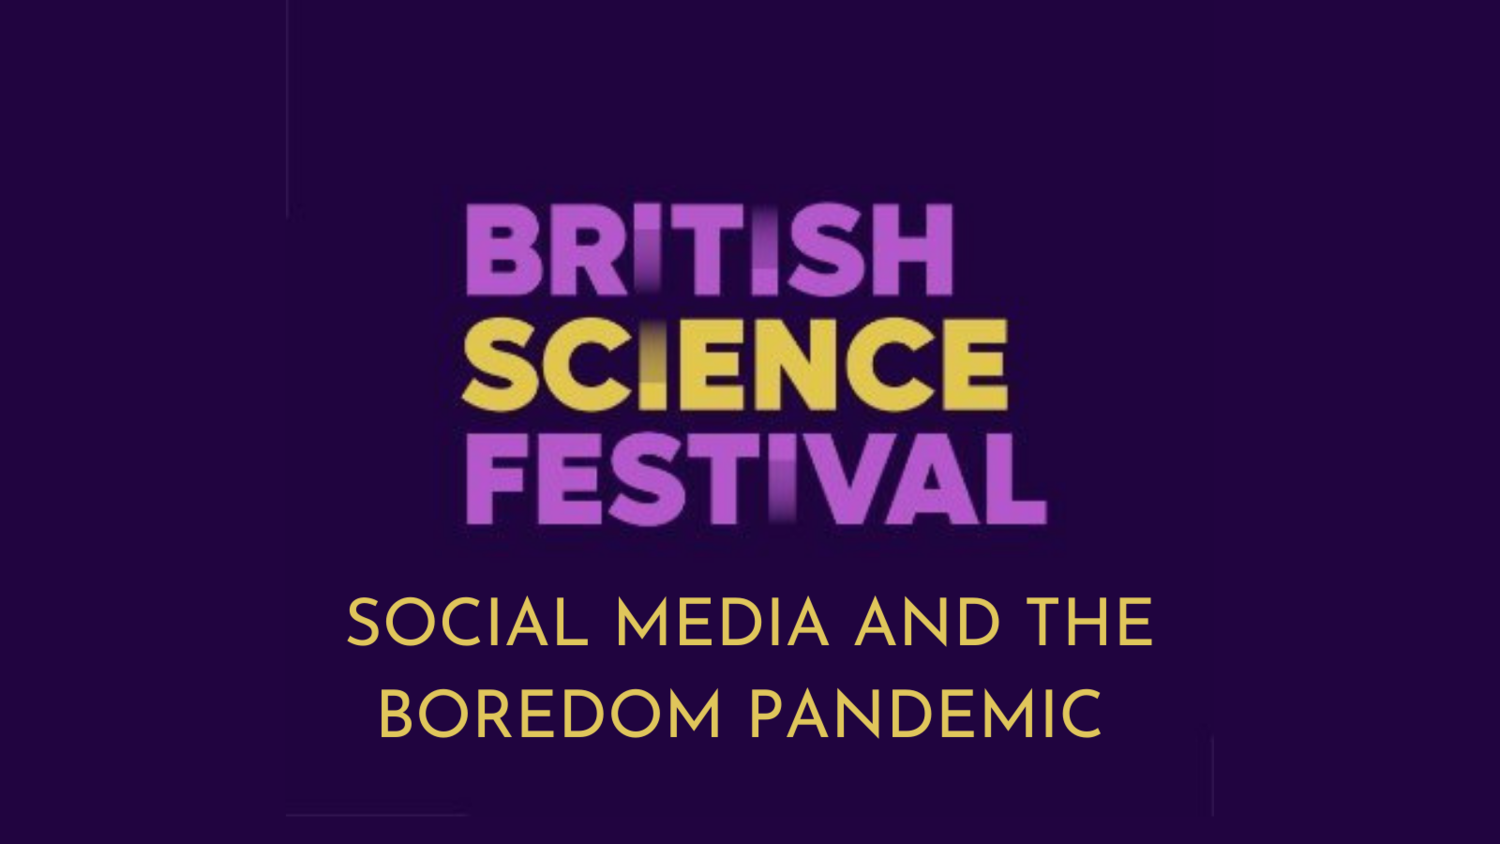 Hosted an event for the British Science Festival on for TikTok: why mixed-race identity is being debated on the social media app